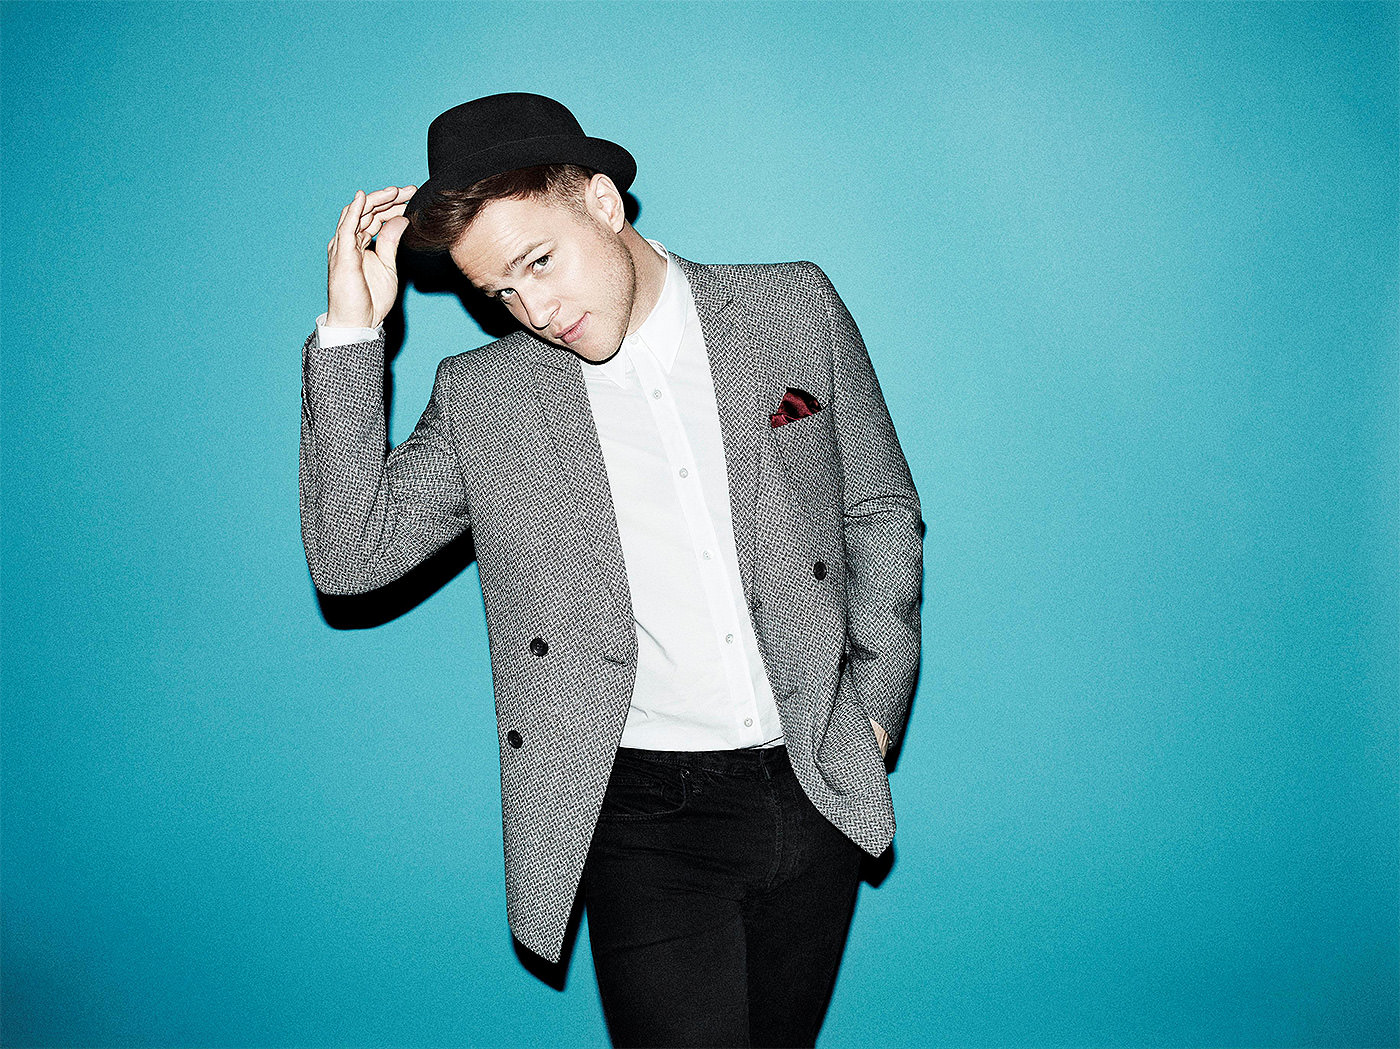 The Olly Murs factor: ‘If critics don’t like me that’s fine’